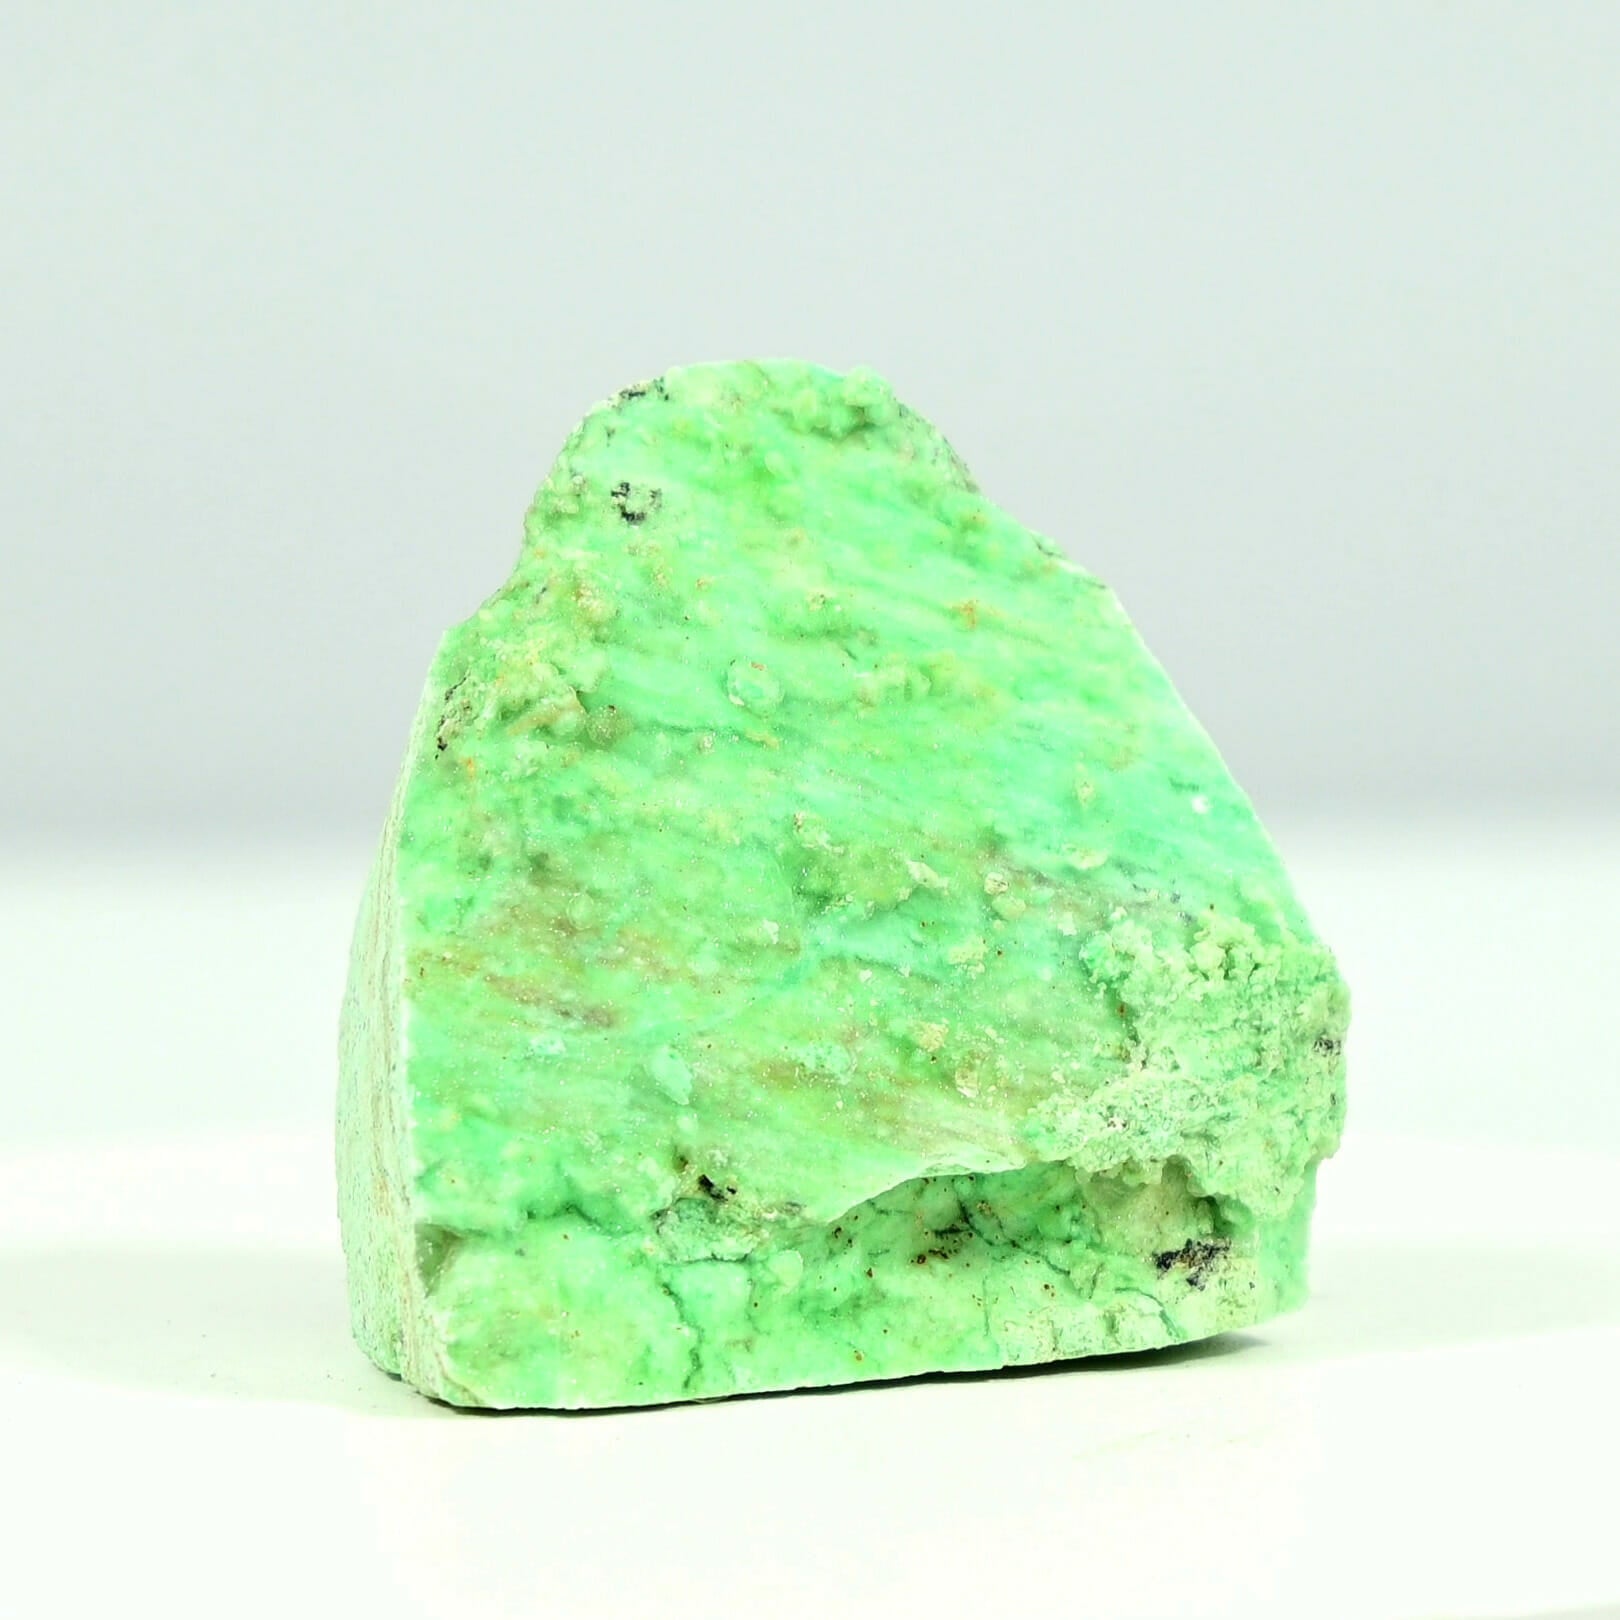 Super rare find green druzy base cluster soft touch and super bling side 1